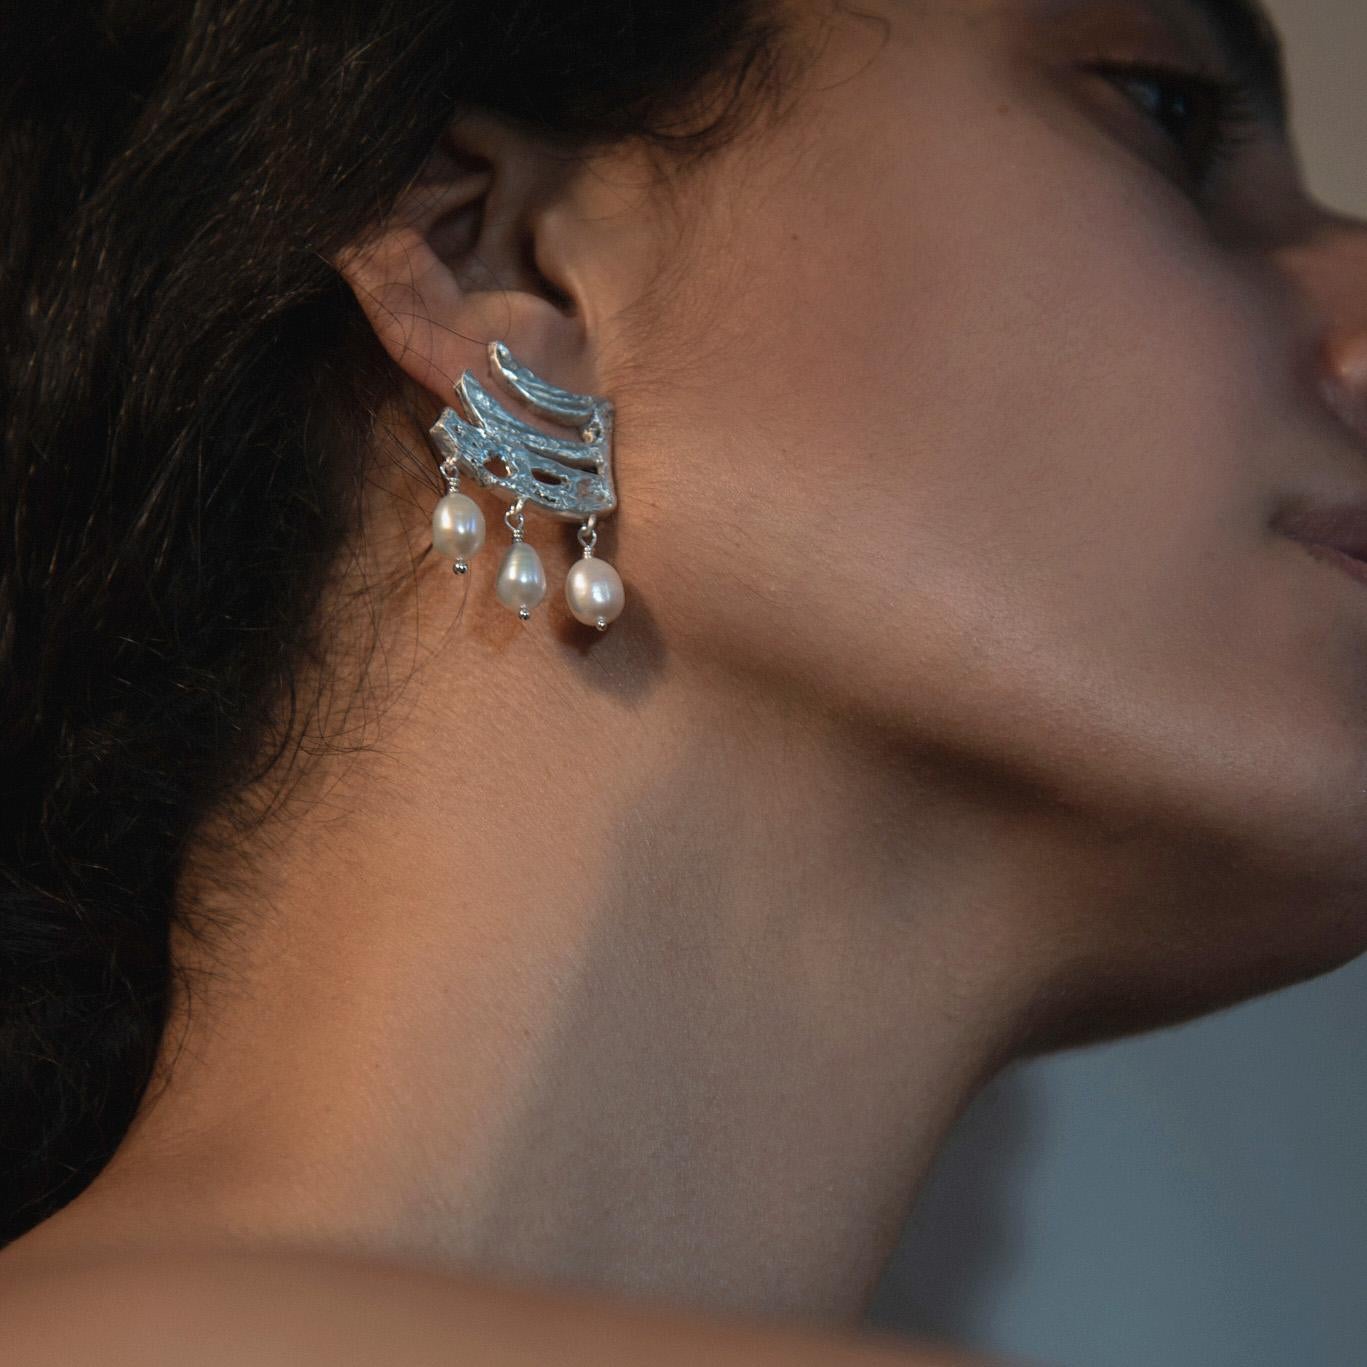 The Eternal Luck Earrings are a treasure trove of ancient elegance, inspired by the vessels of Anatolia's long-lost past. Fragments of a time buried deep within the soil, their textured surface tells tales of centuries old. A unique and meaningful